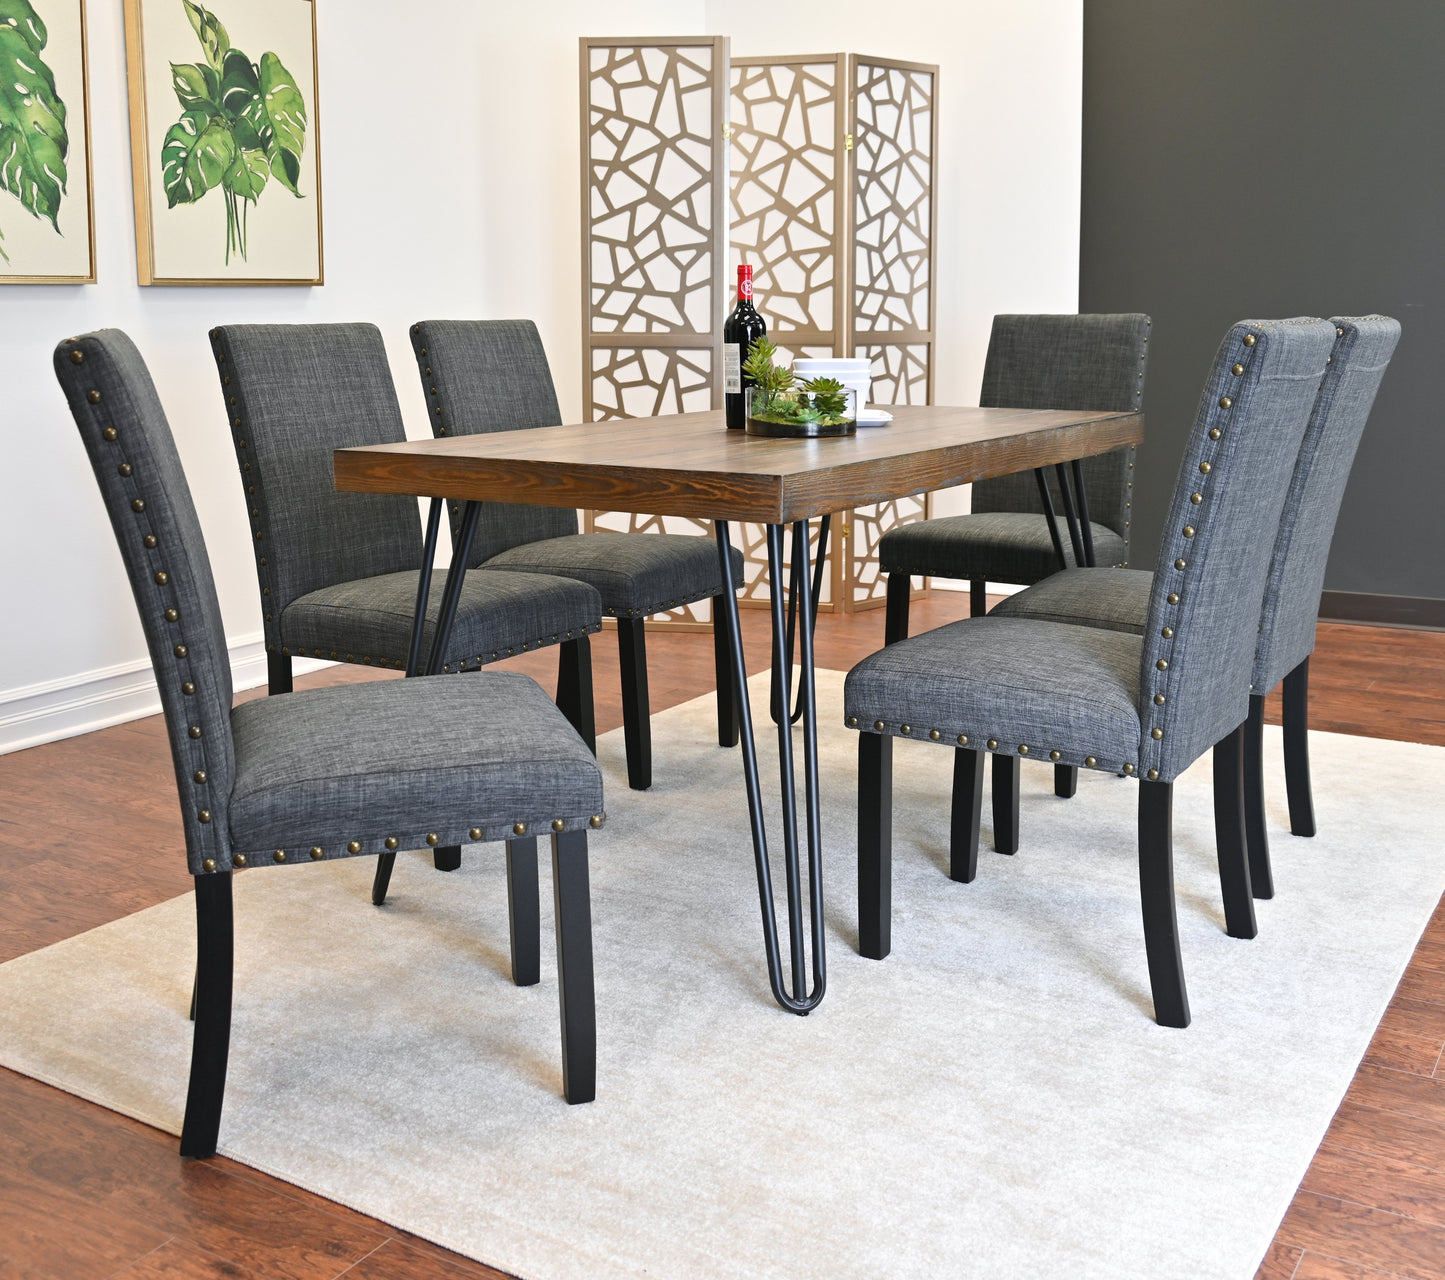 Amisos 7-Piece Dining Set, Hairpin Dining Table with 6 Chairs, 3 Color Options